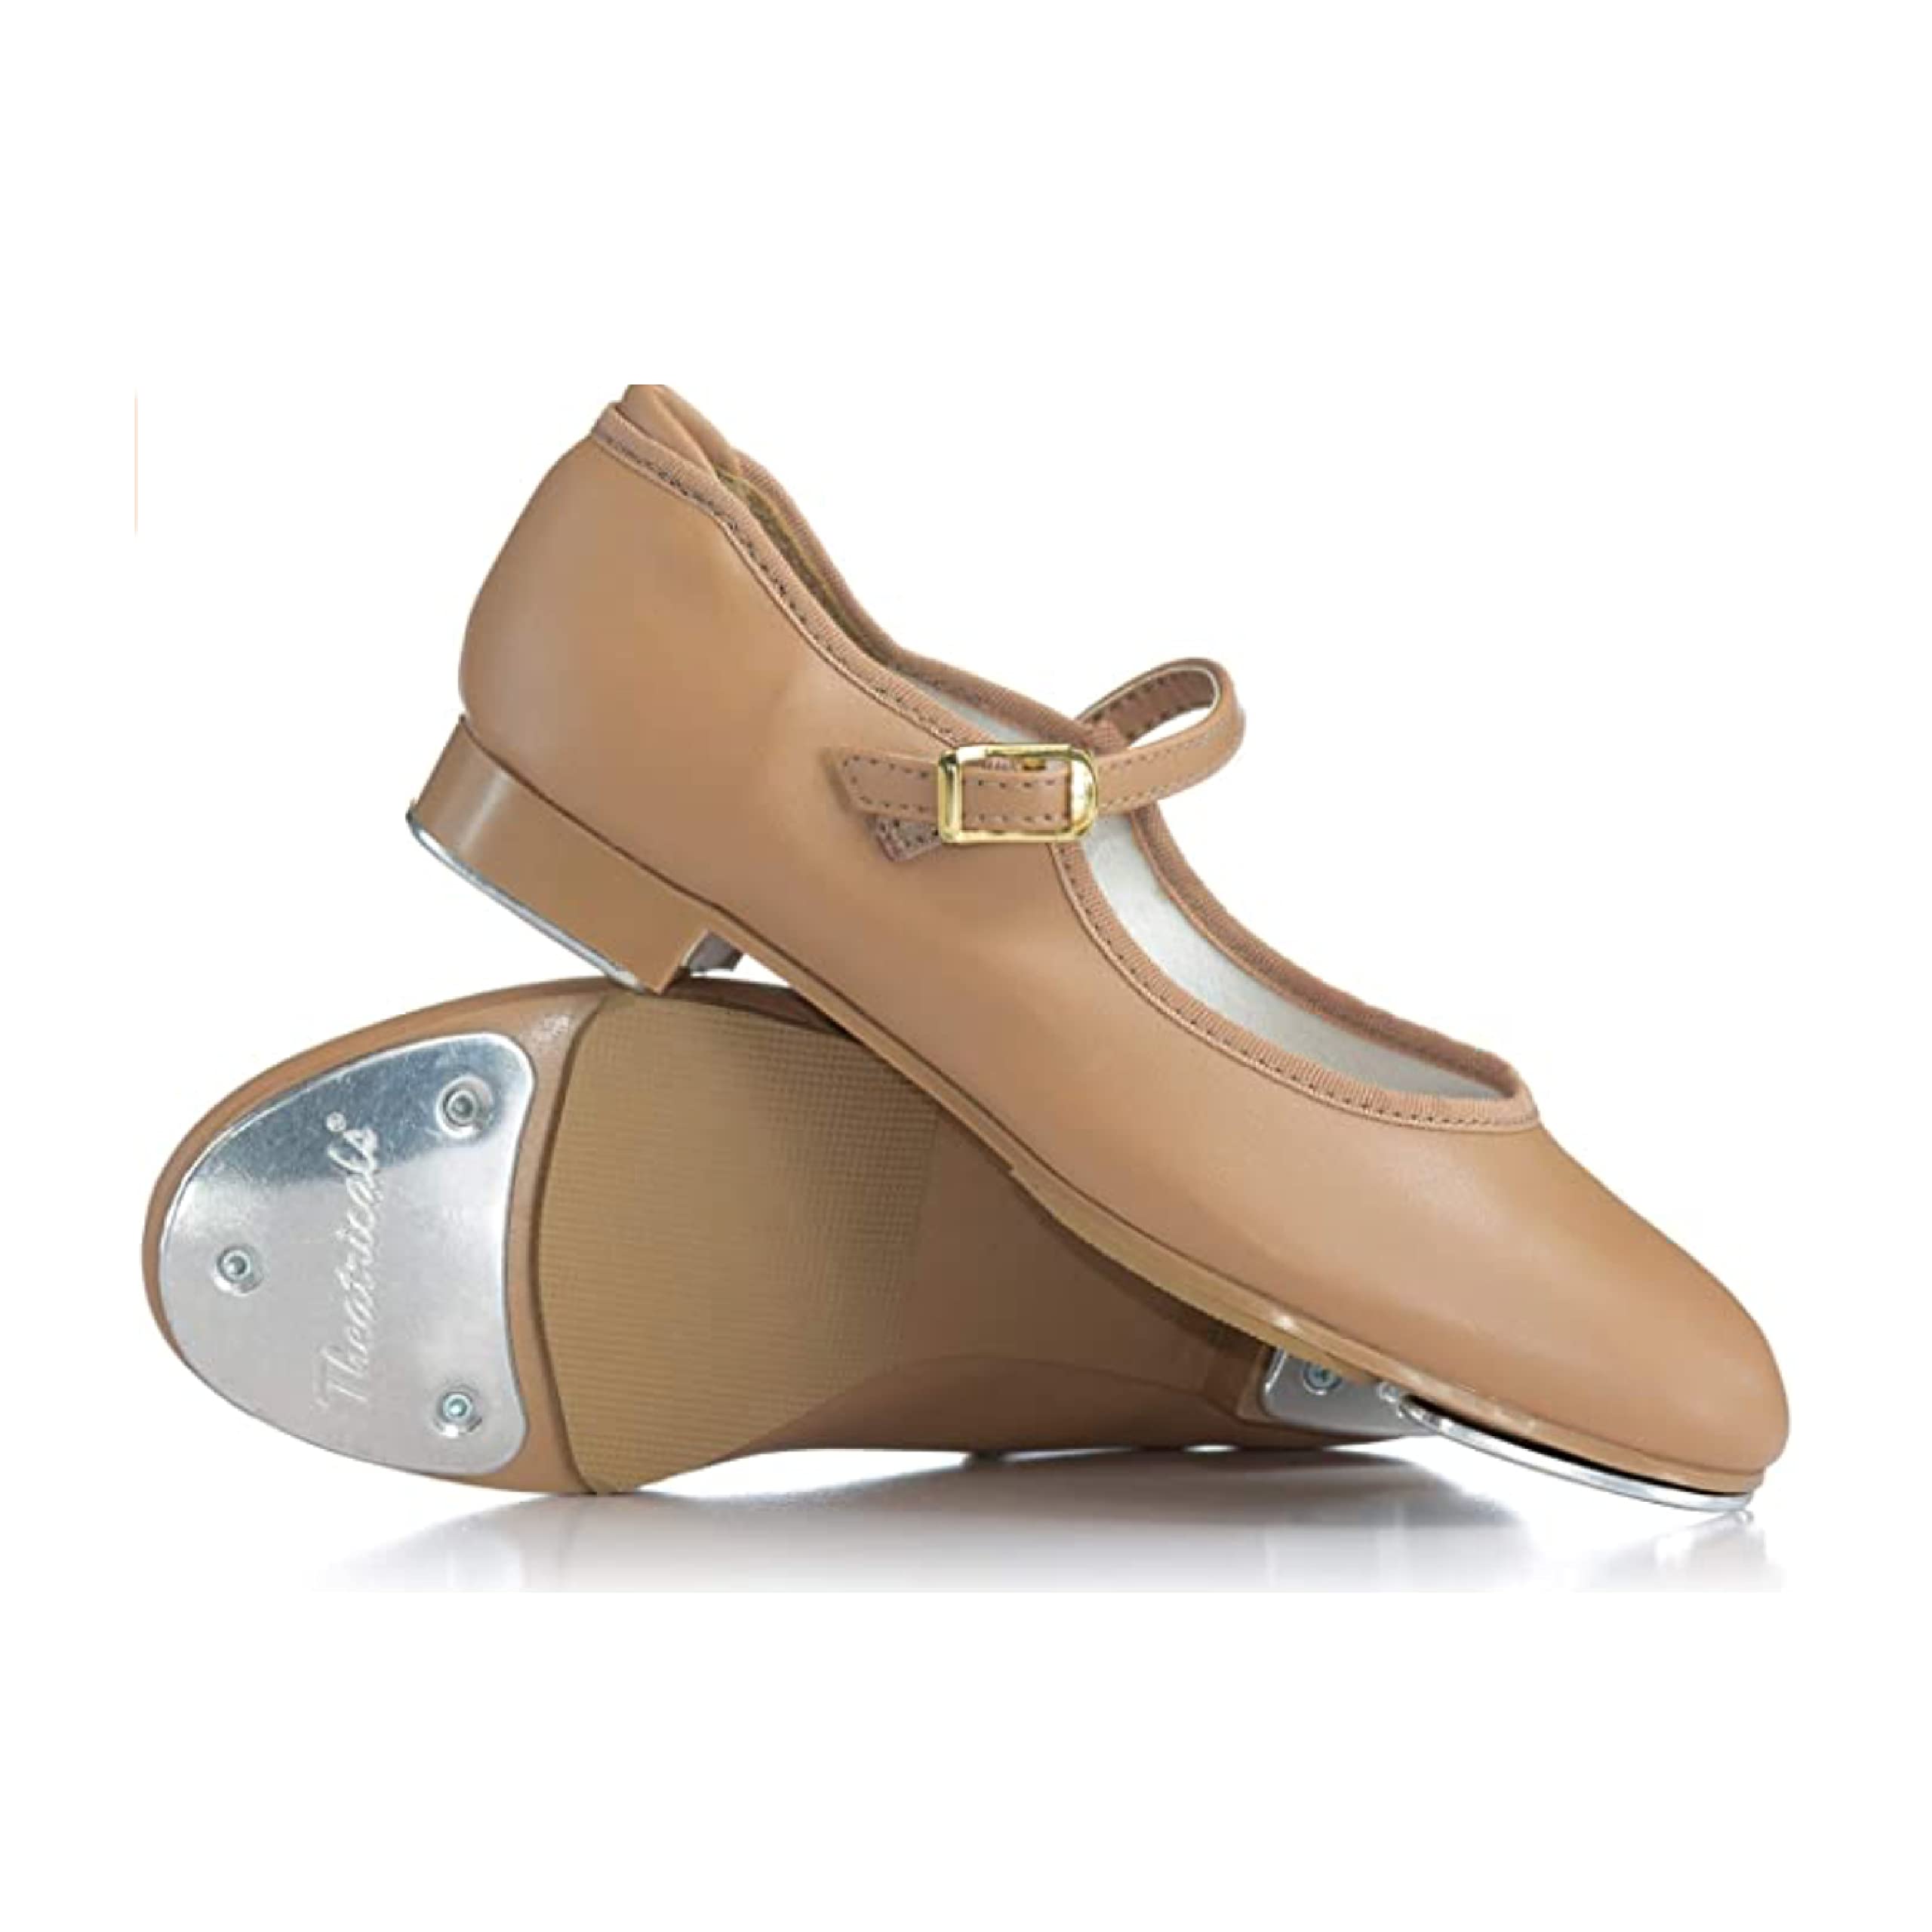 Bloch Girl's Tap On Tap Shoes, Tan Leather, Rubber